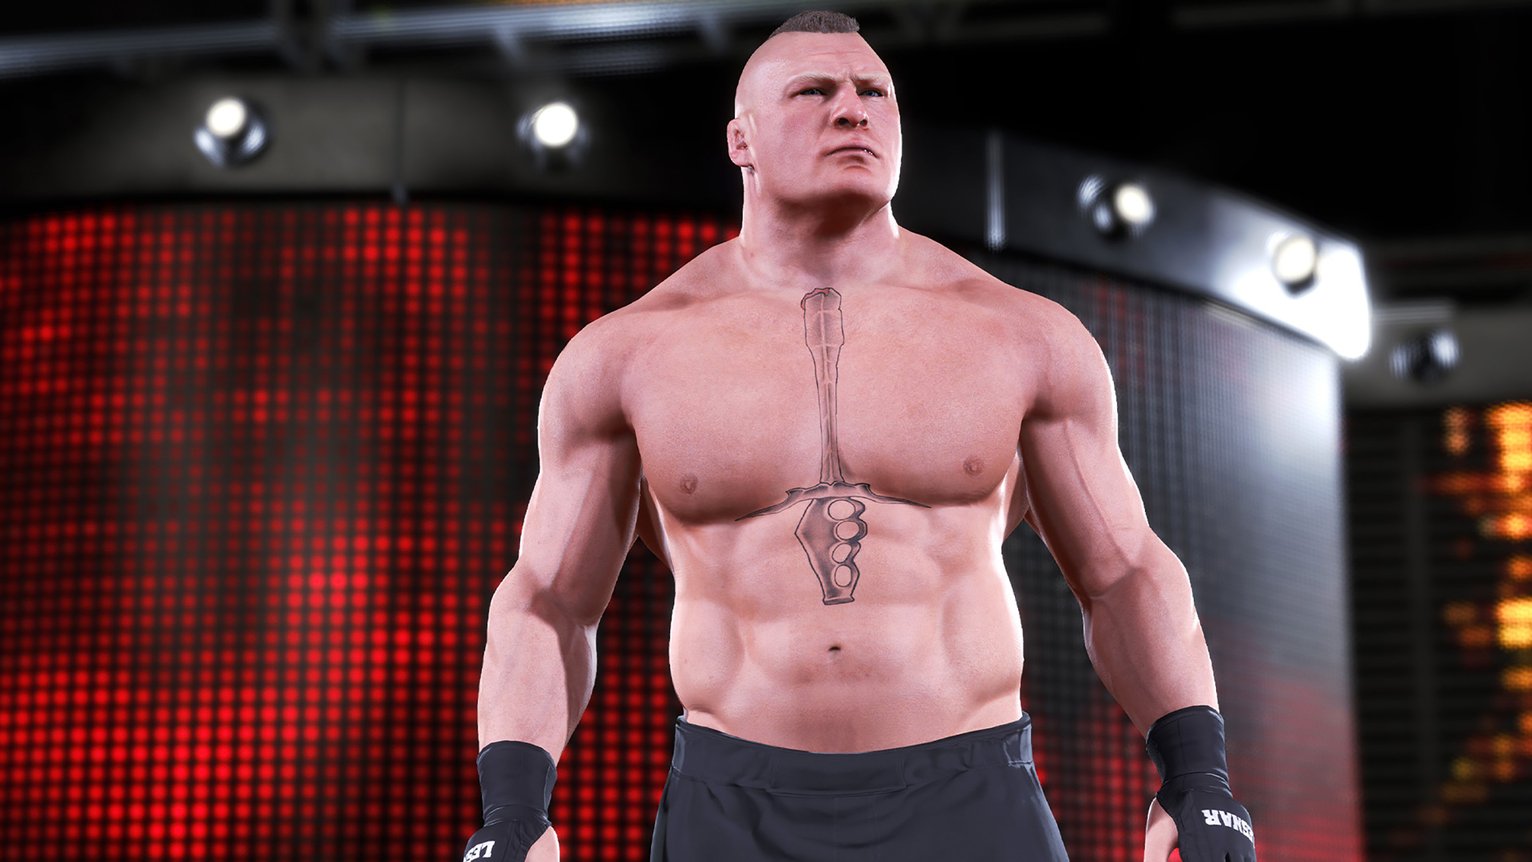 WWE 2K20 Xbox One Game Review